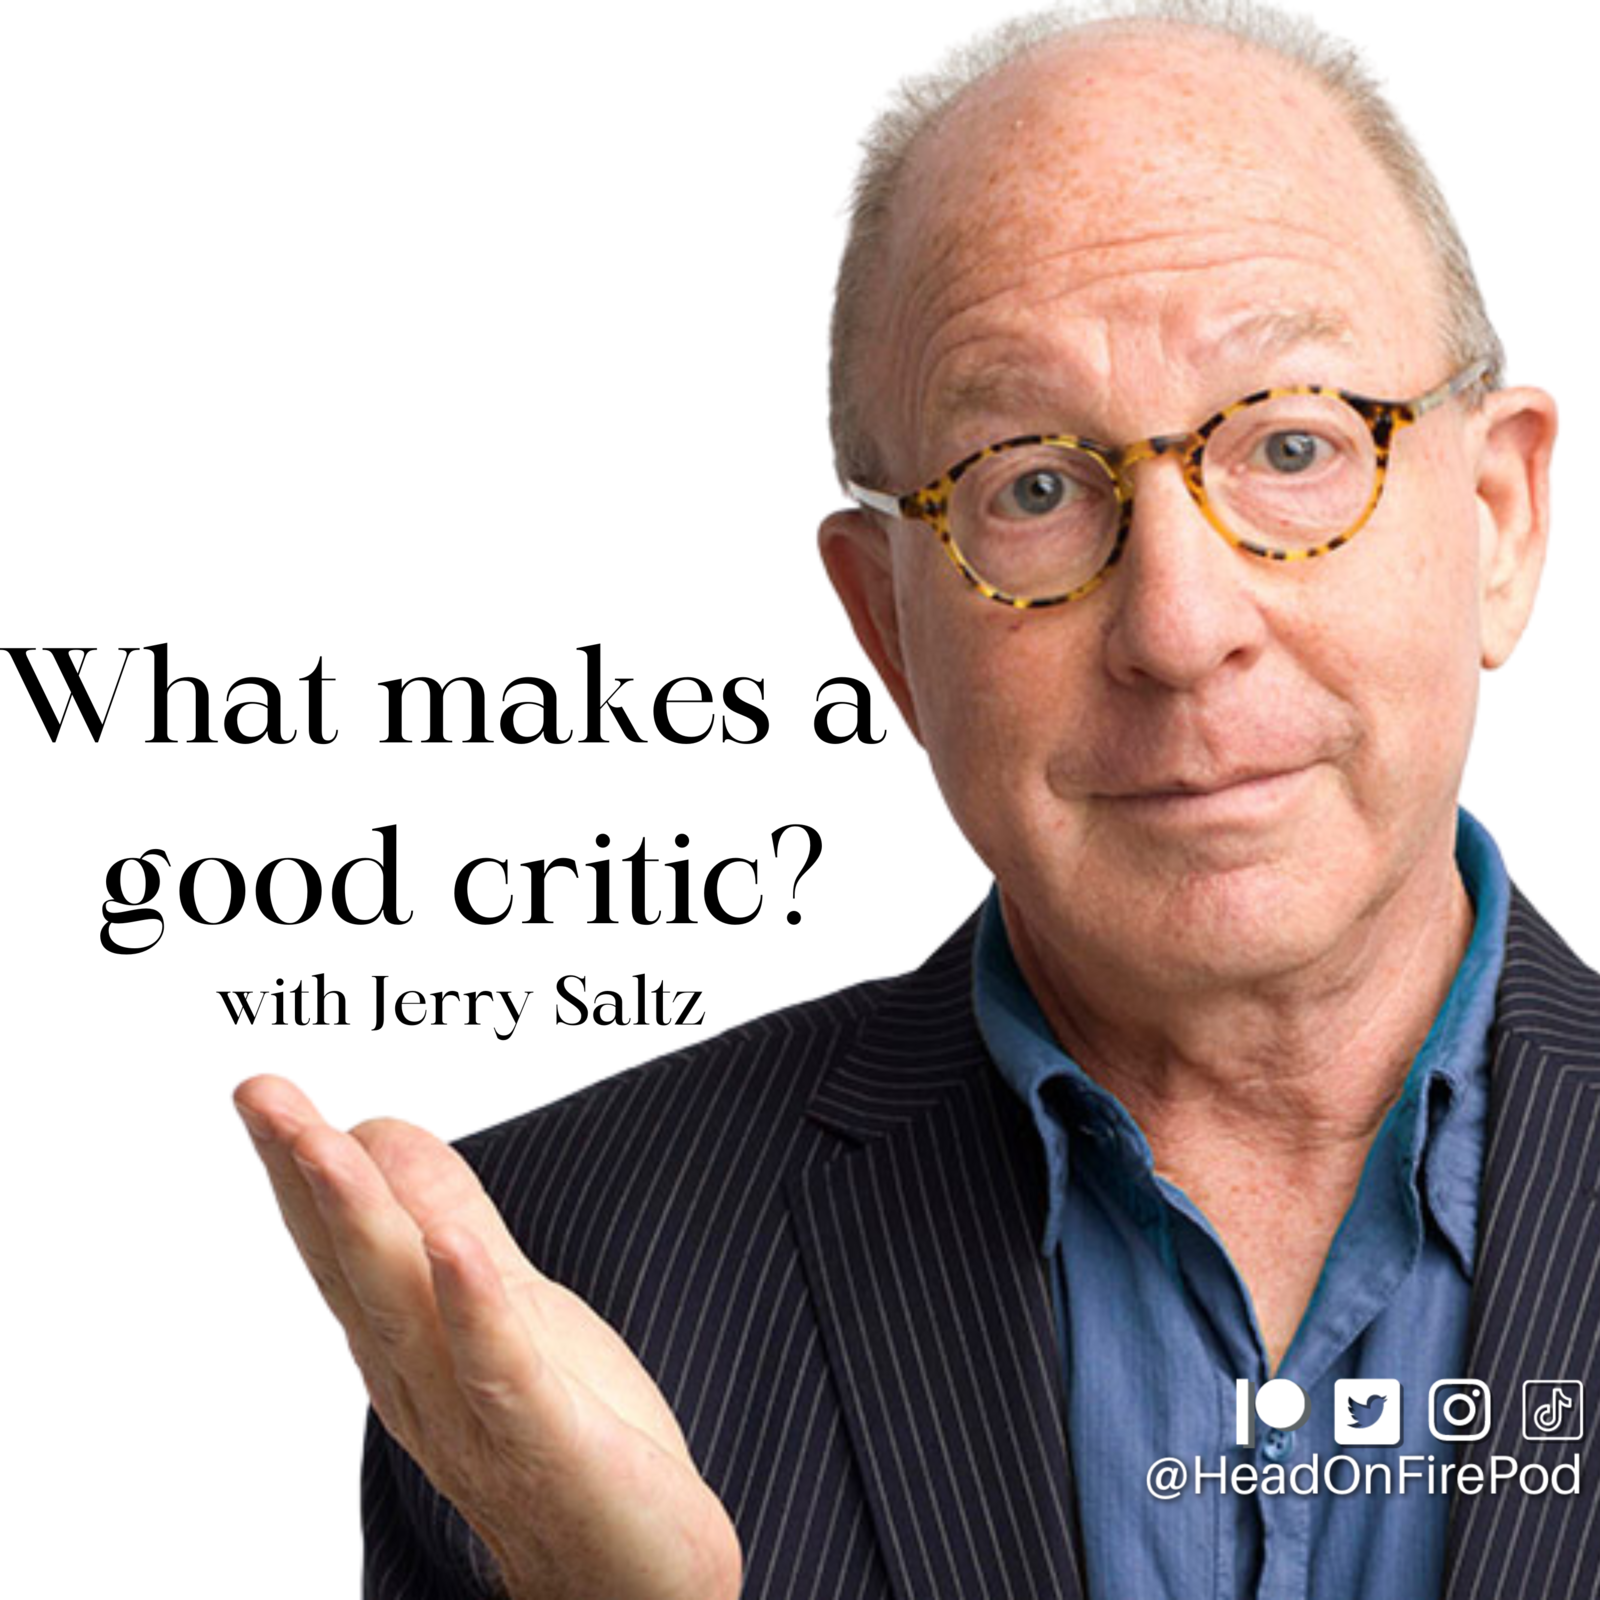 What makes a good critic? with Jerry Saltz